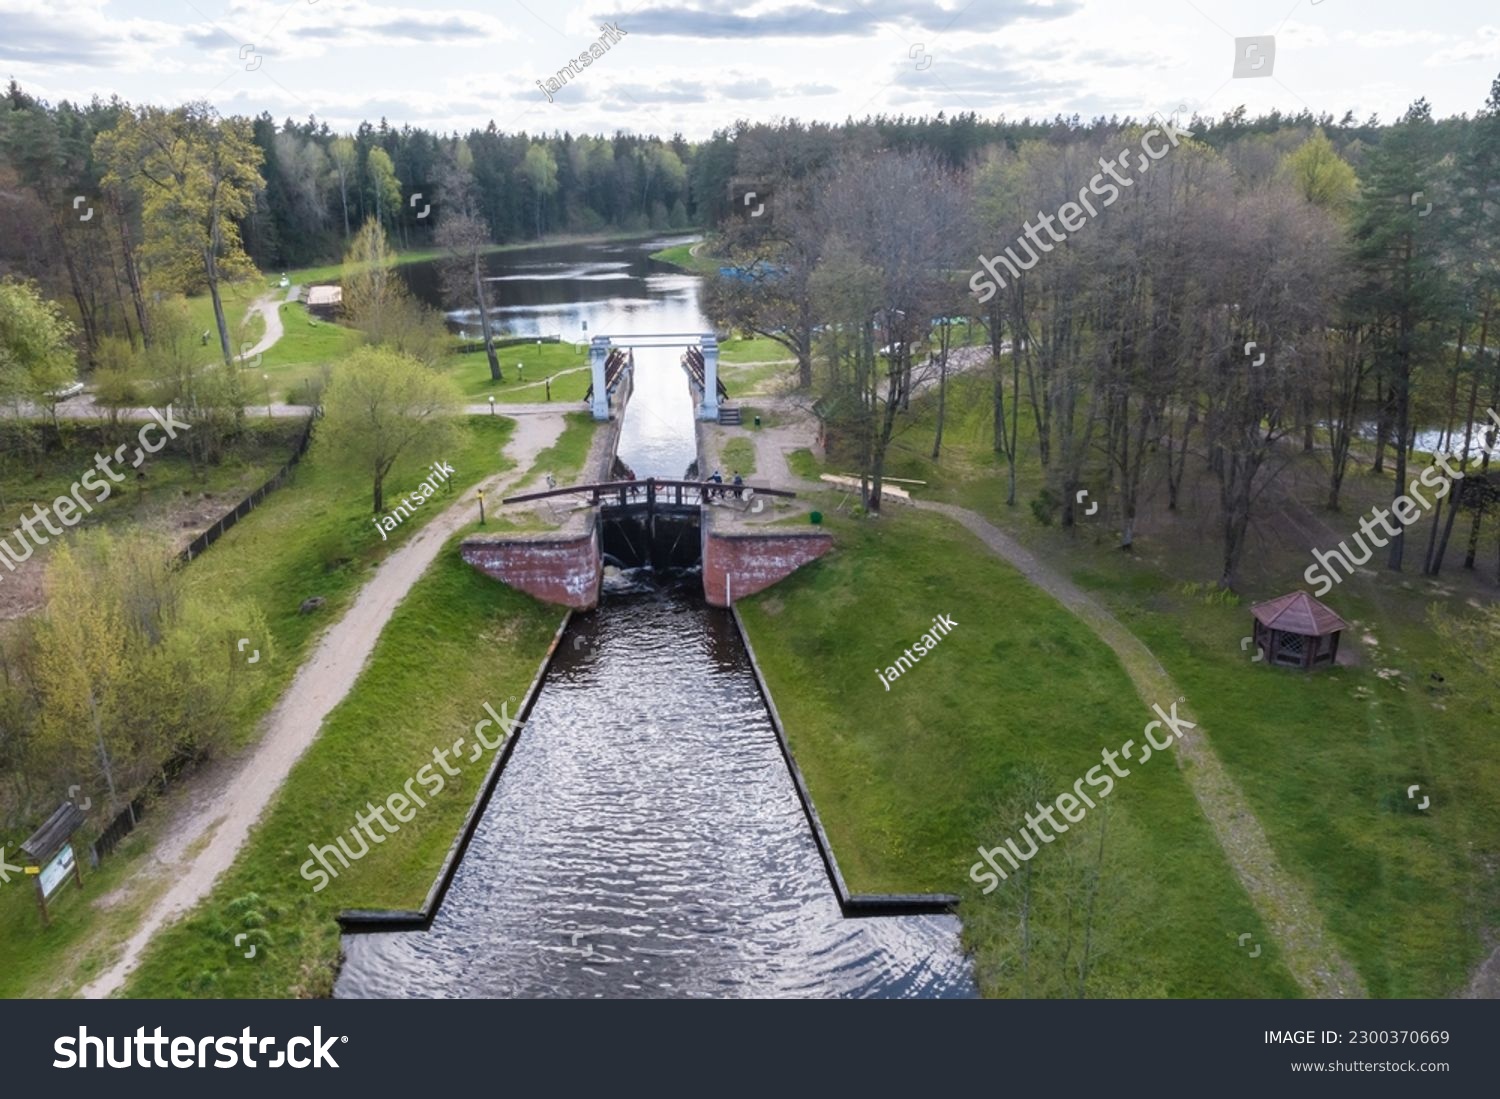 aerial view over dam lock sluice on lake impetuous waterfall #2300370669